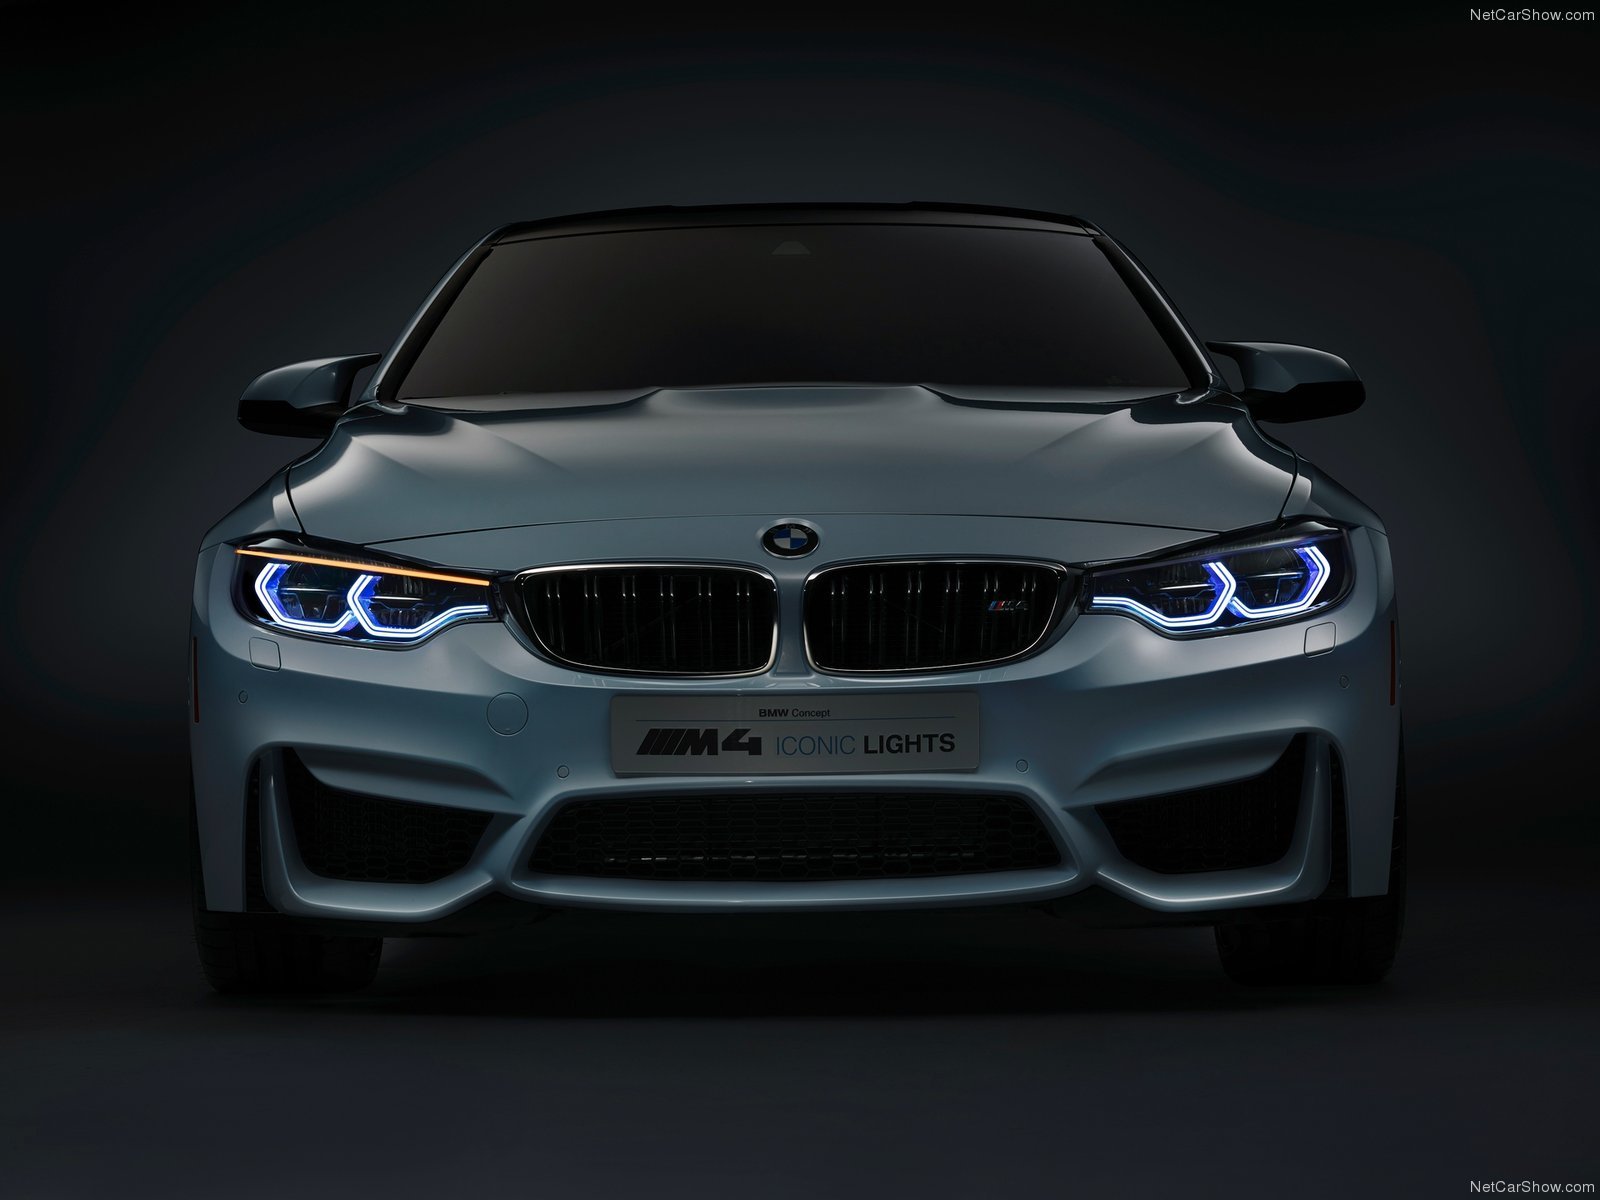 bmw, M4, Iconic, Lights, Concept, Cars, 2015 Wallpaper